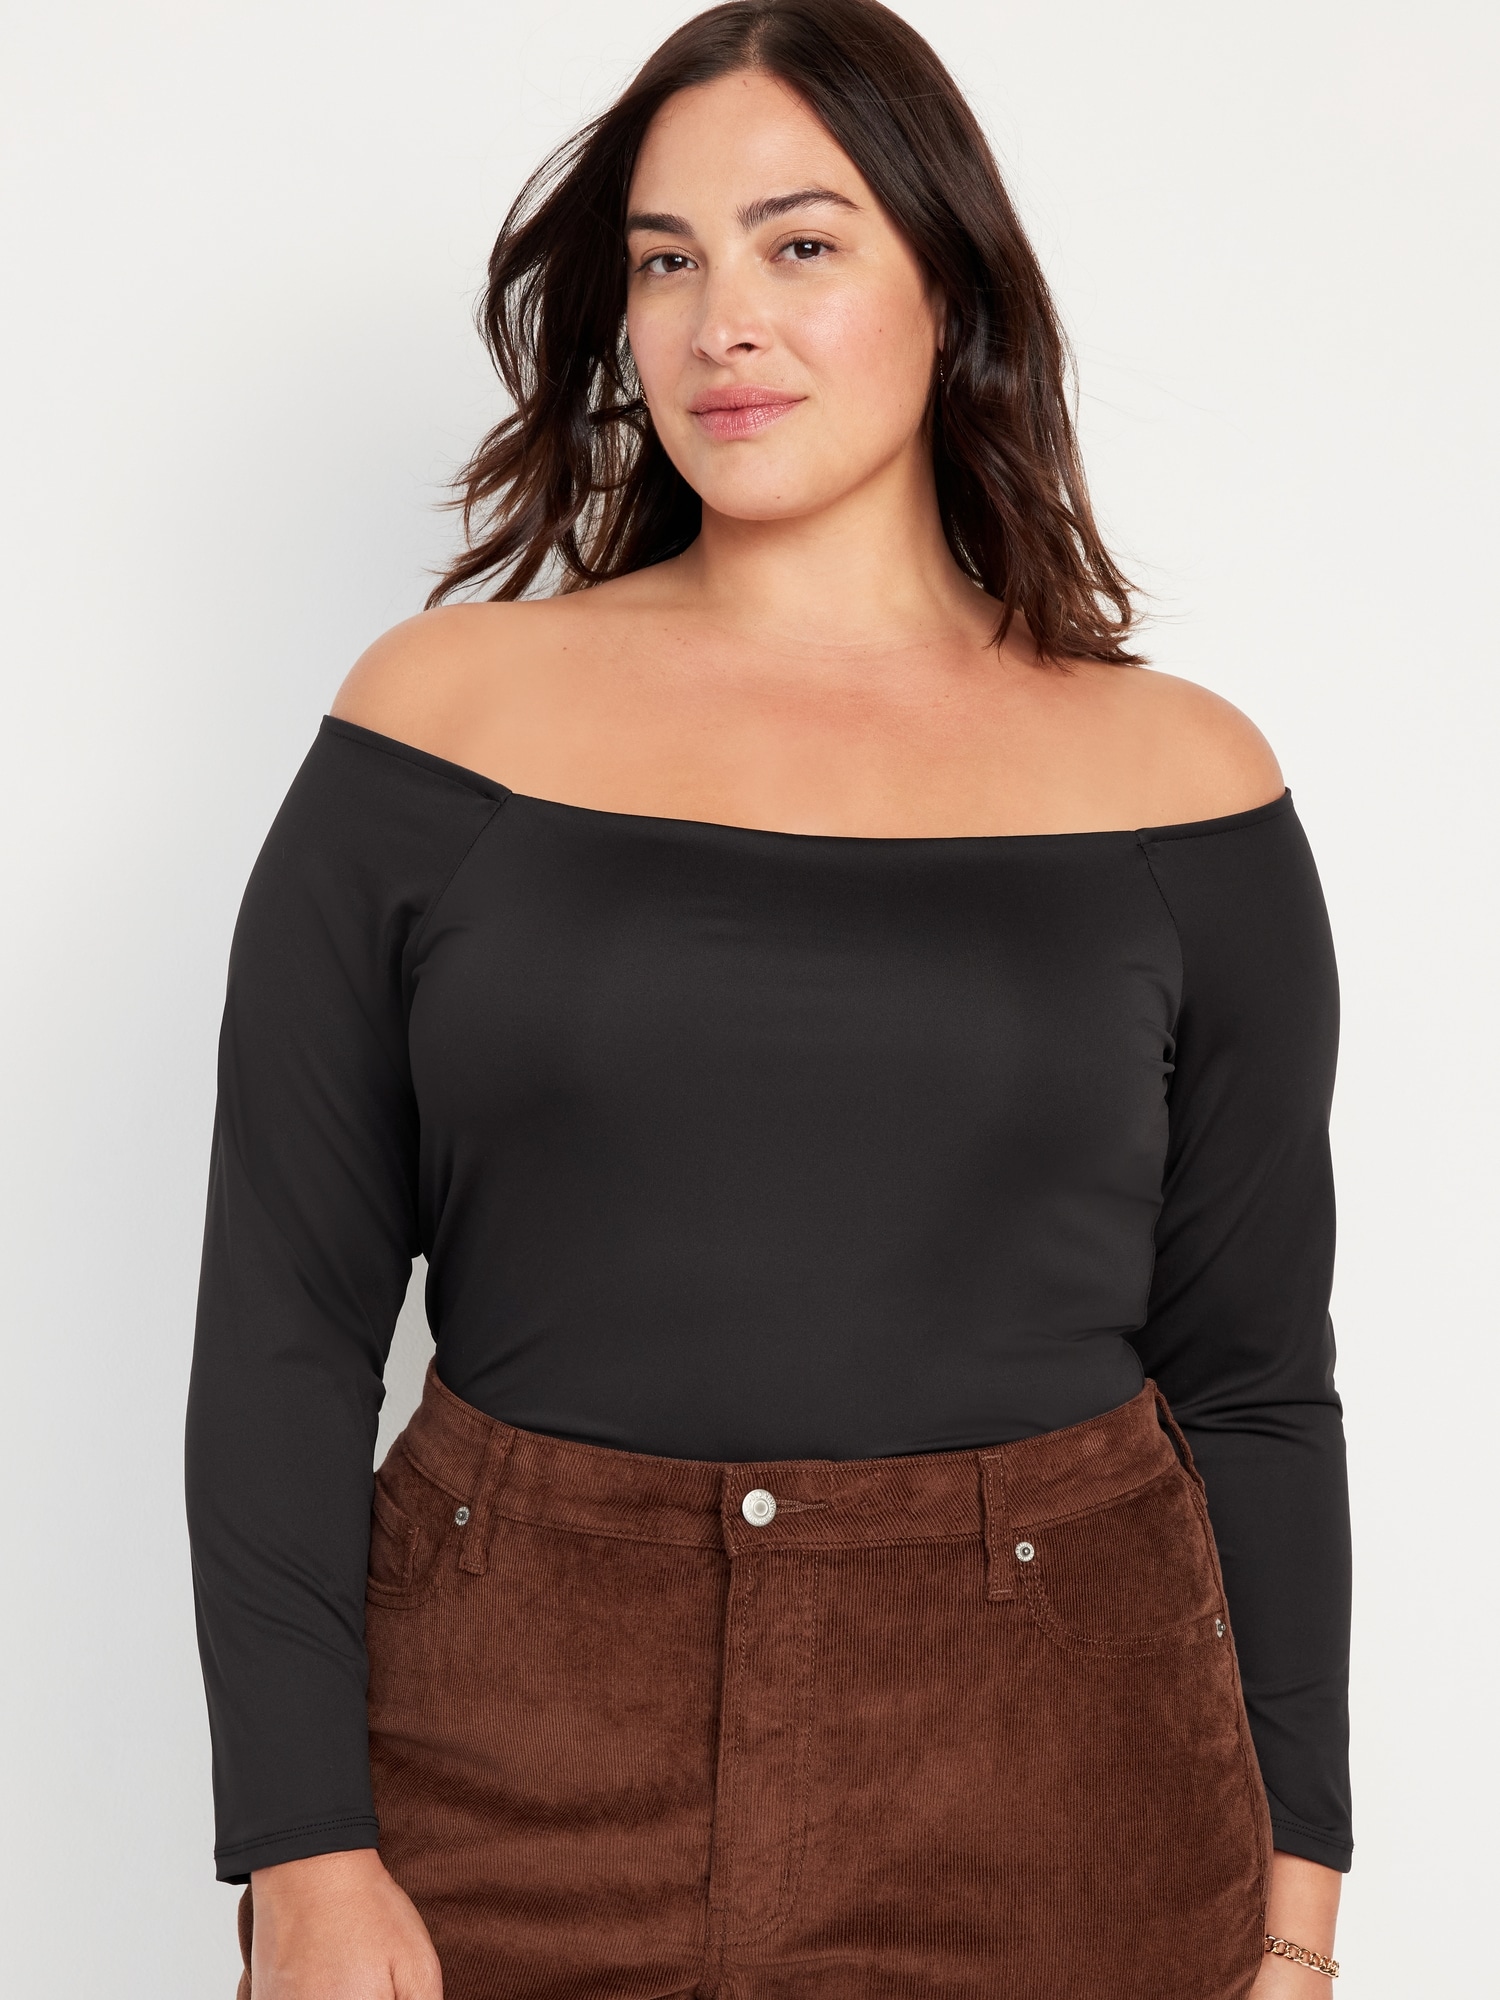 Fitted Off-the-Shoulder Top for Women | Old Navy